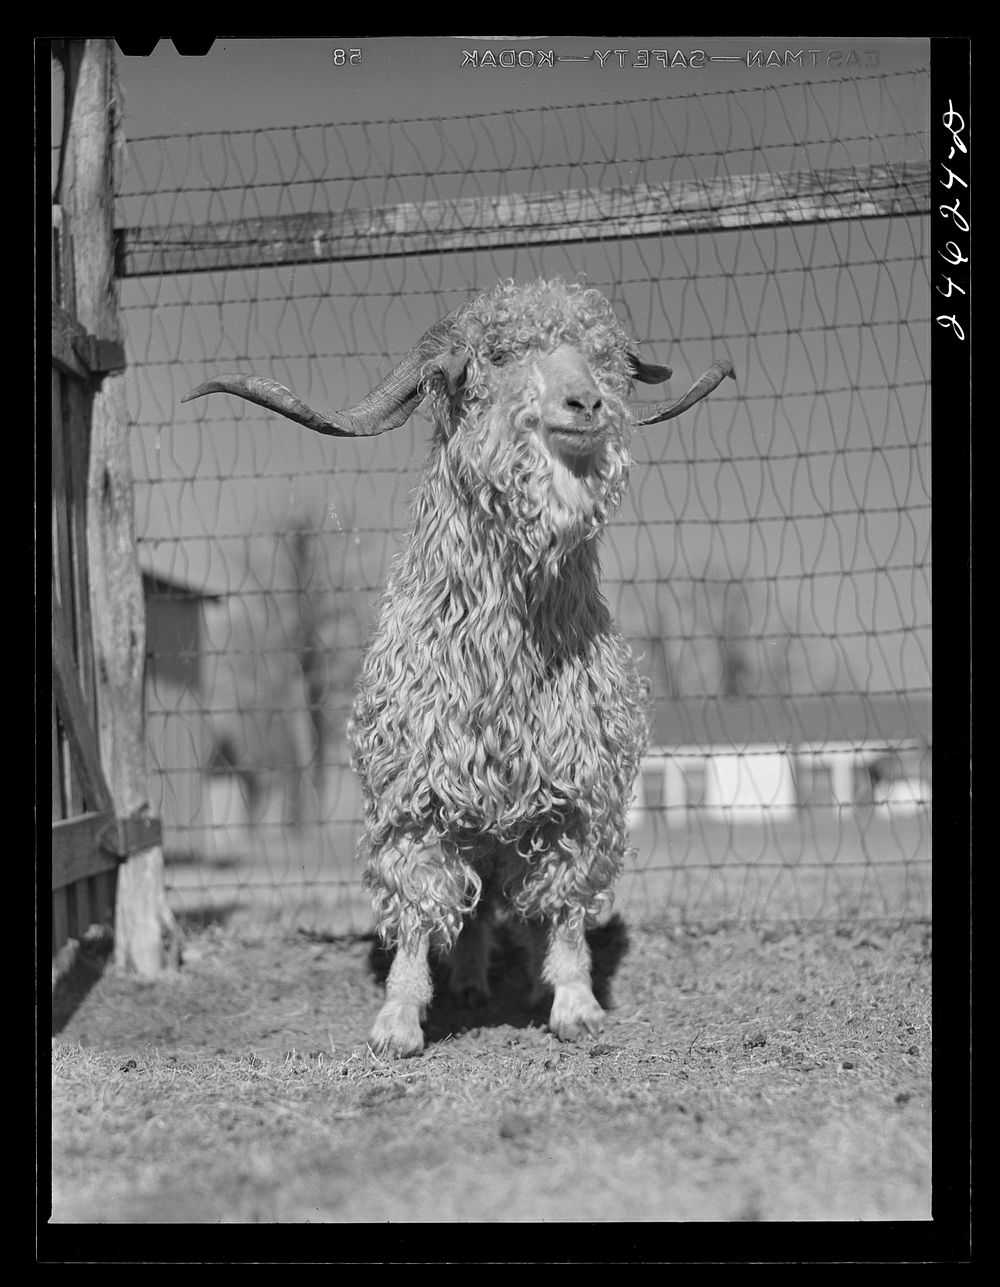 College Station, Texas. Texas Agricultural and Mechanical College. Male goat. Sourced from the Library of Congress.